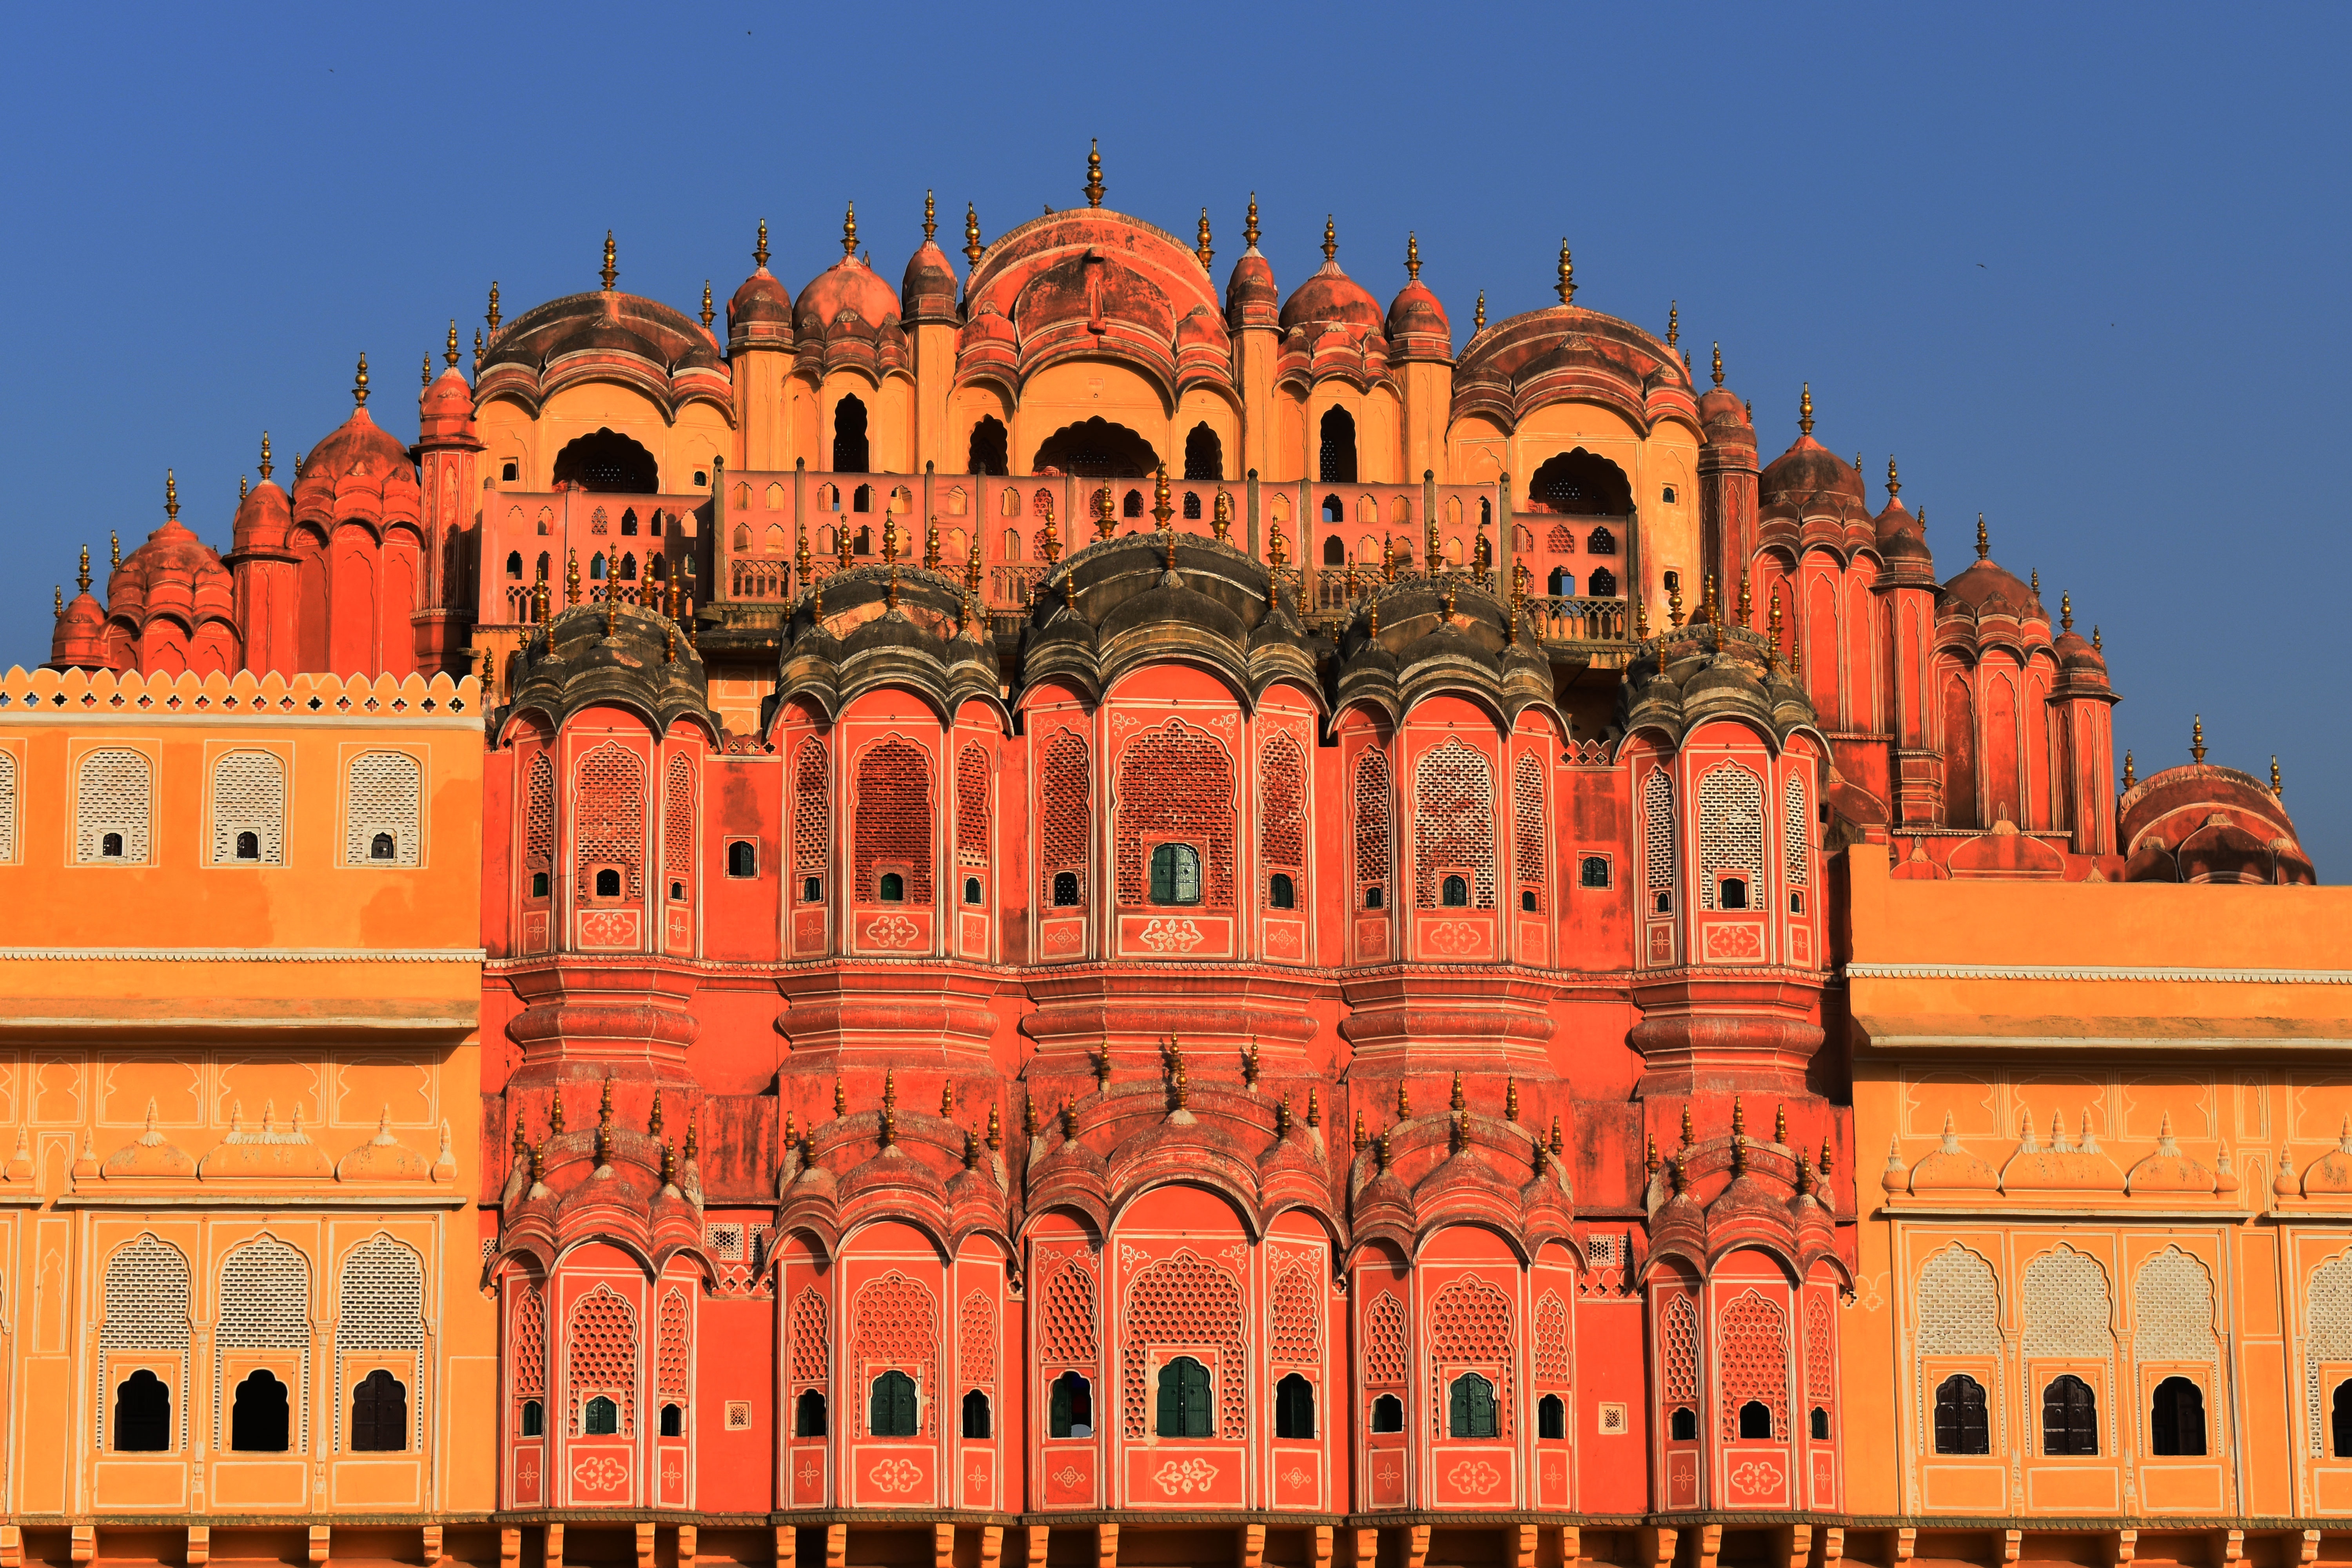 Hawa Mahal of Jaipur is a beautiful palace of Jaipur. It looks more pretty in the sun light. Here is the windows of Hawa mahal.